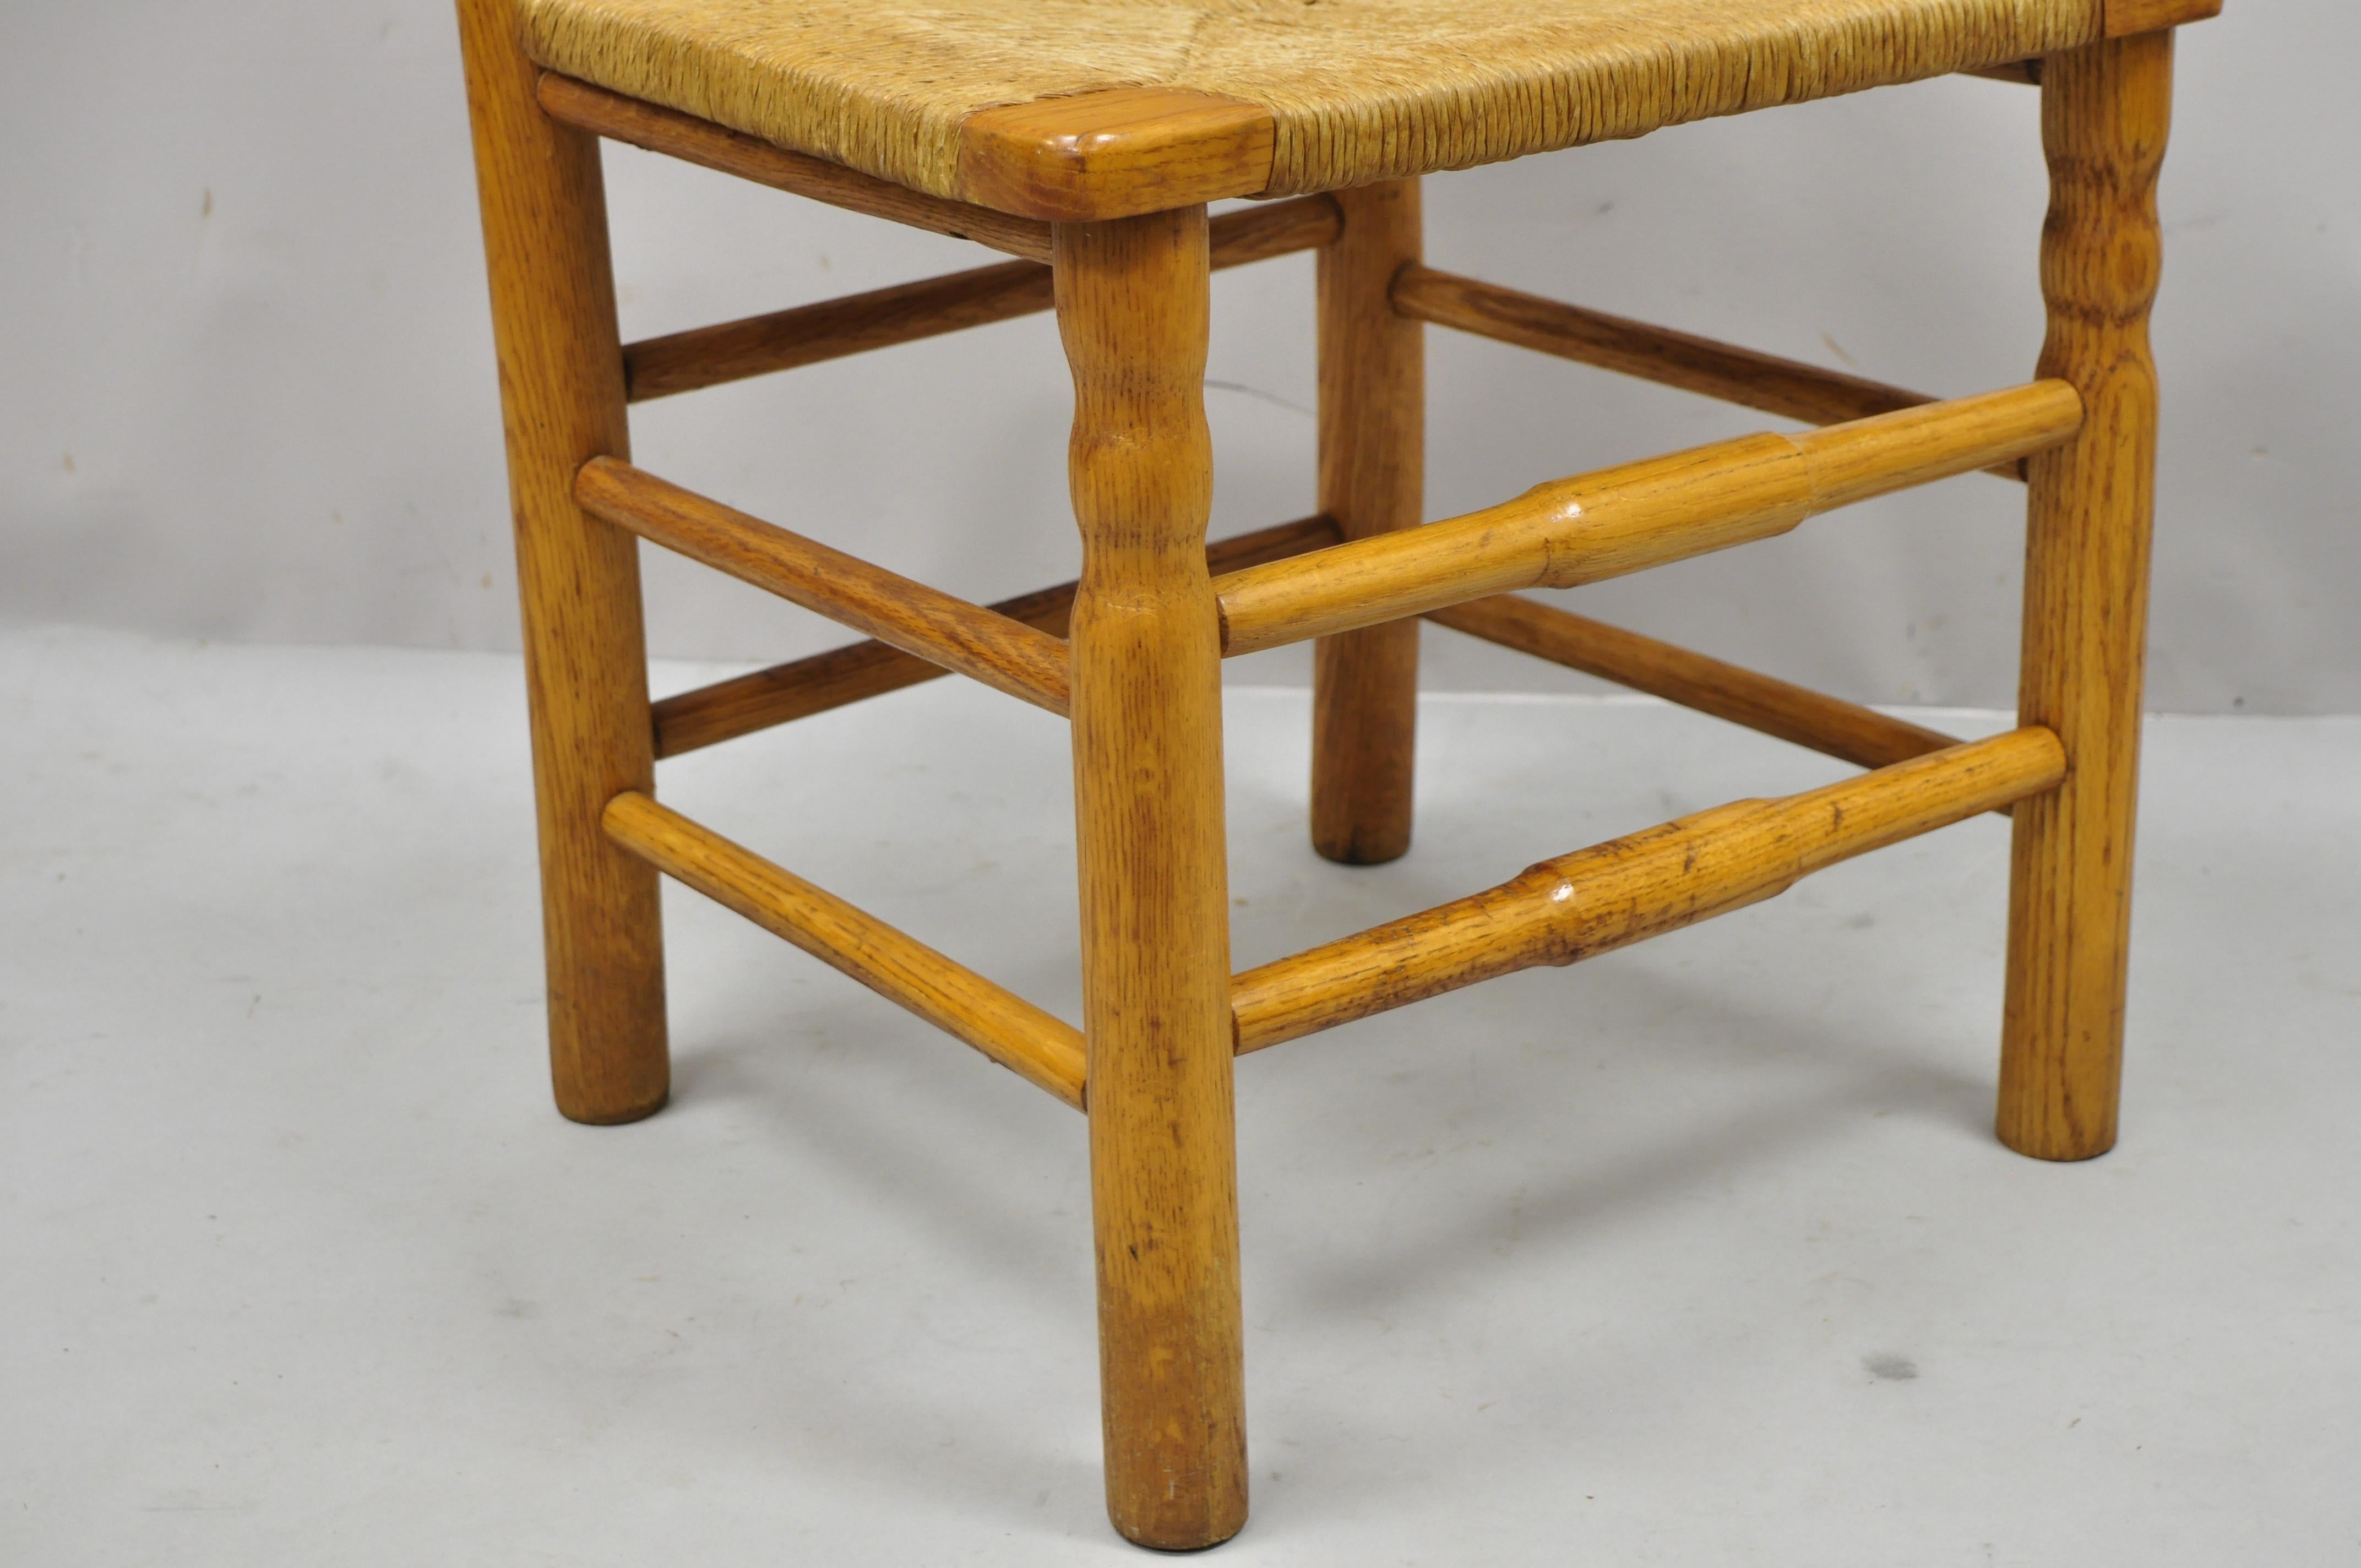 Vintage Oak Wood Rush Seat Tall Ladderback Dining Room Rustic Chairs, Set of 6 2